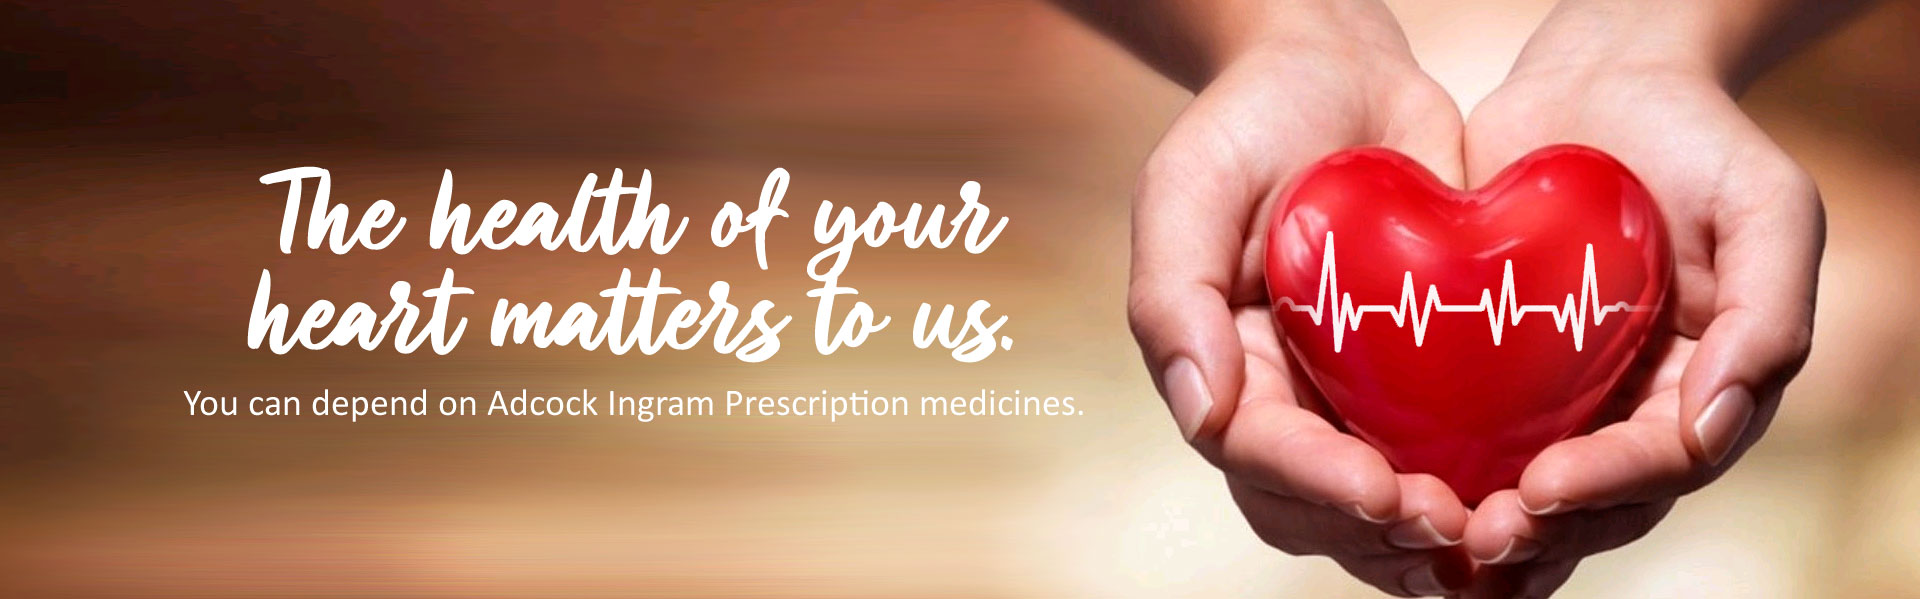 The health of your heart matters to us. You can depend on Adcock Ingram Prescription Medicines